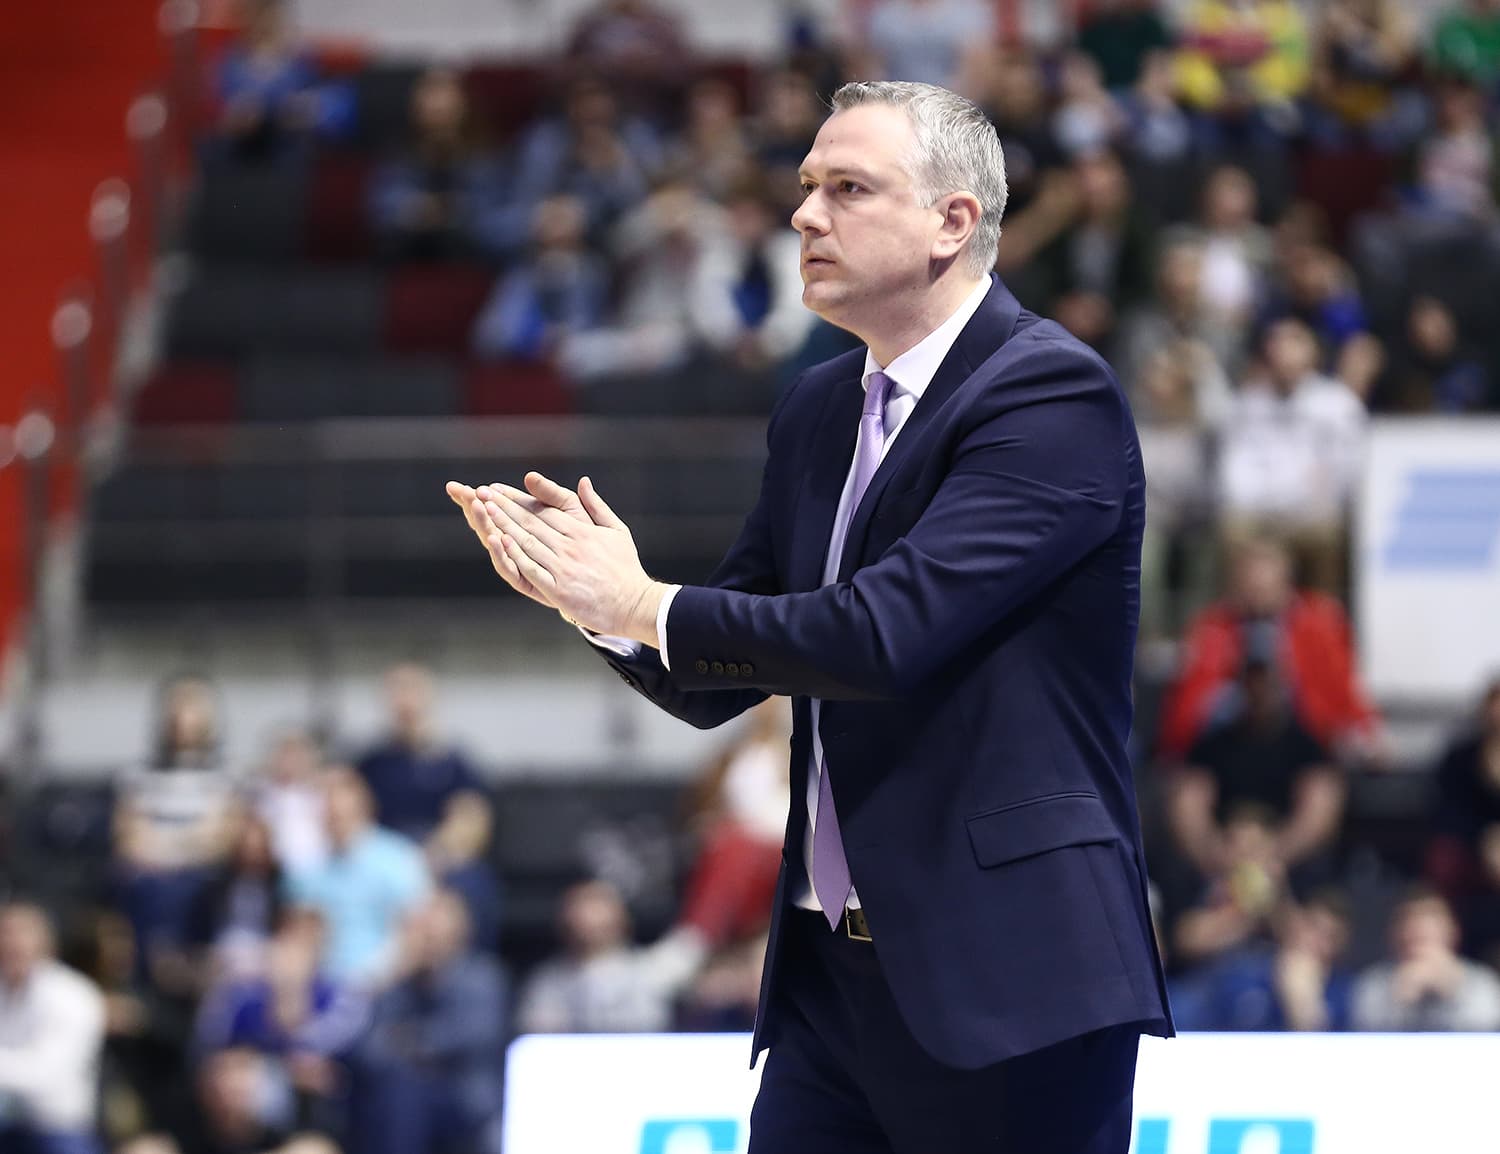 Emil Rajkovic: If We Had Valery Tikhonenko On Our Roster In His Prime, We’d Be VTB League Champions